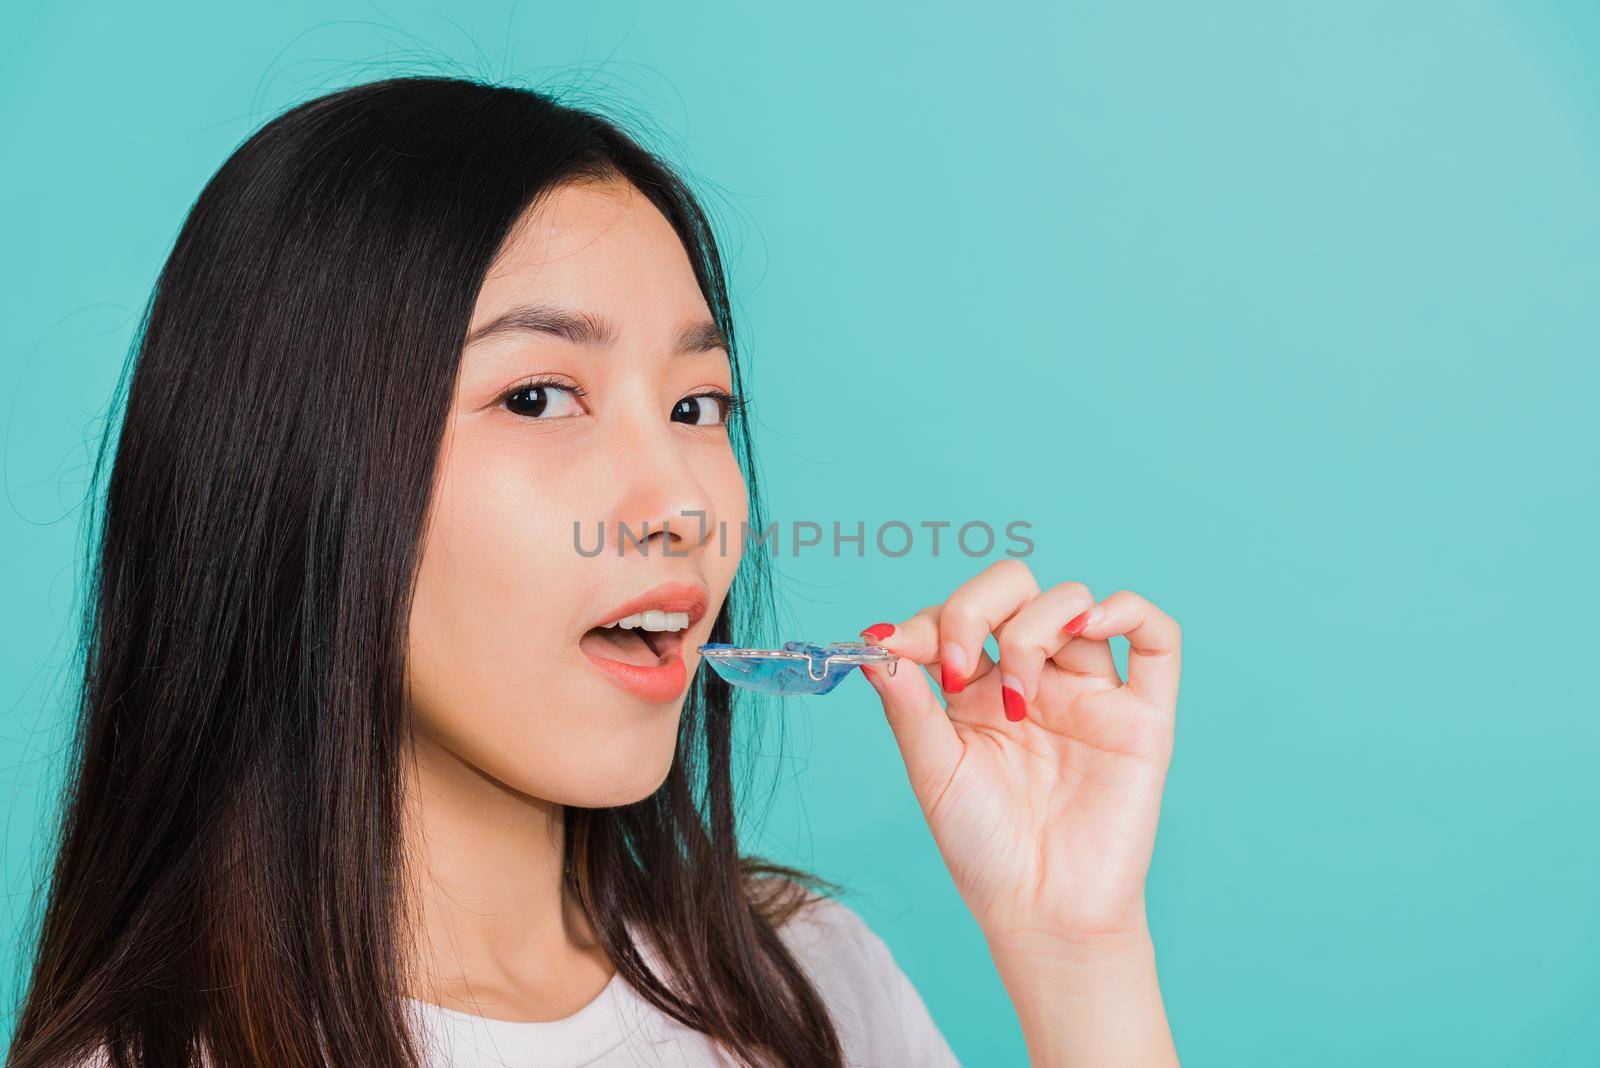 Female hold teeth retaining tools after removable braces, Portrait young Asian beautiful woman smiling wear putting silicone orthodontic retainers for teeth, Orthodontics dental healthy care concept